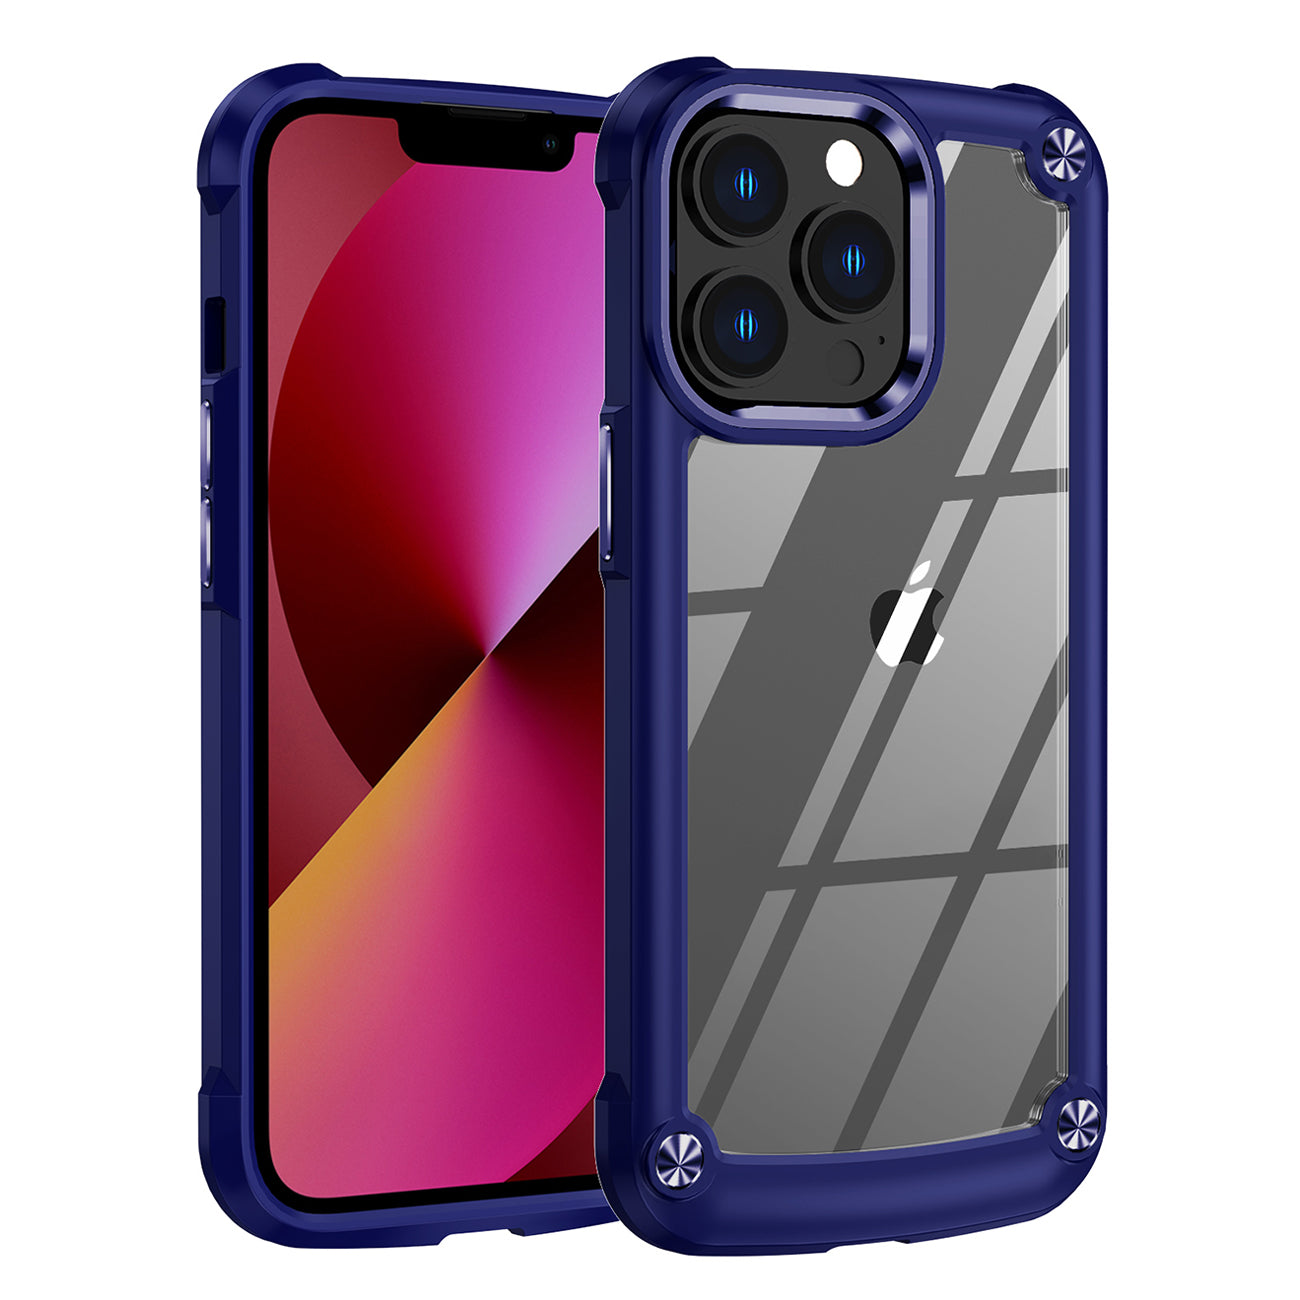 High Quality Clean PC,TPU and Metal Bumper Case For iPhone 13 PRO In Navy